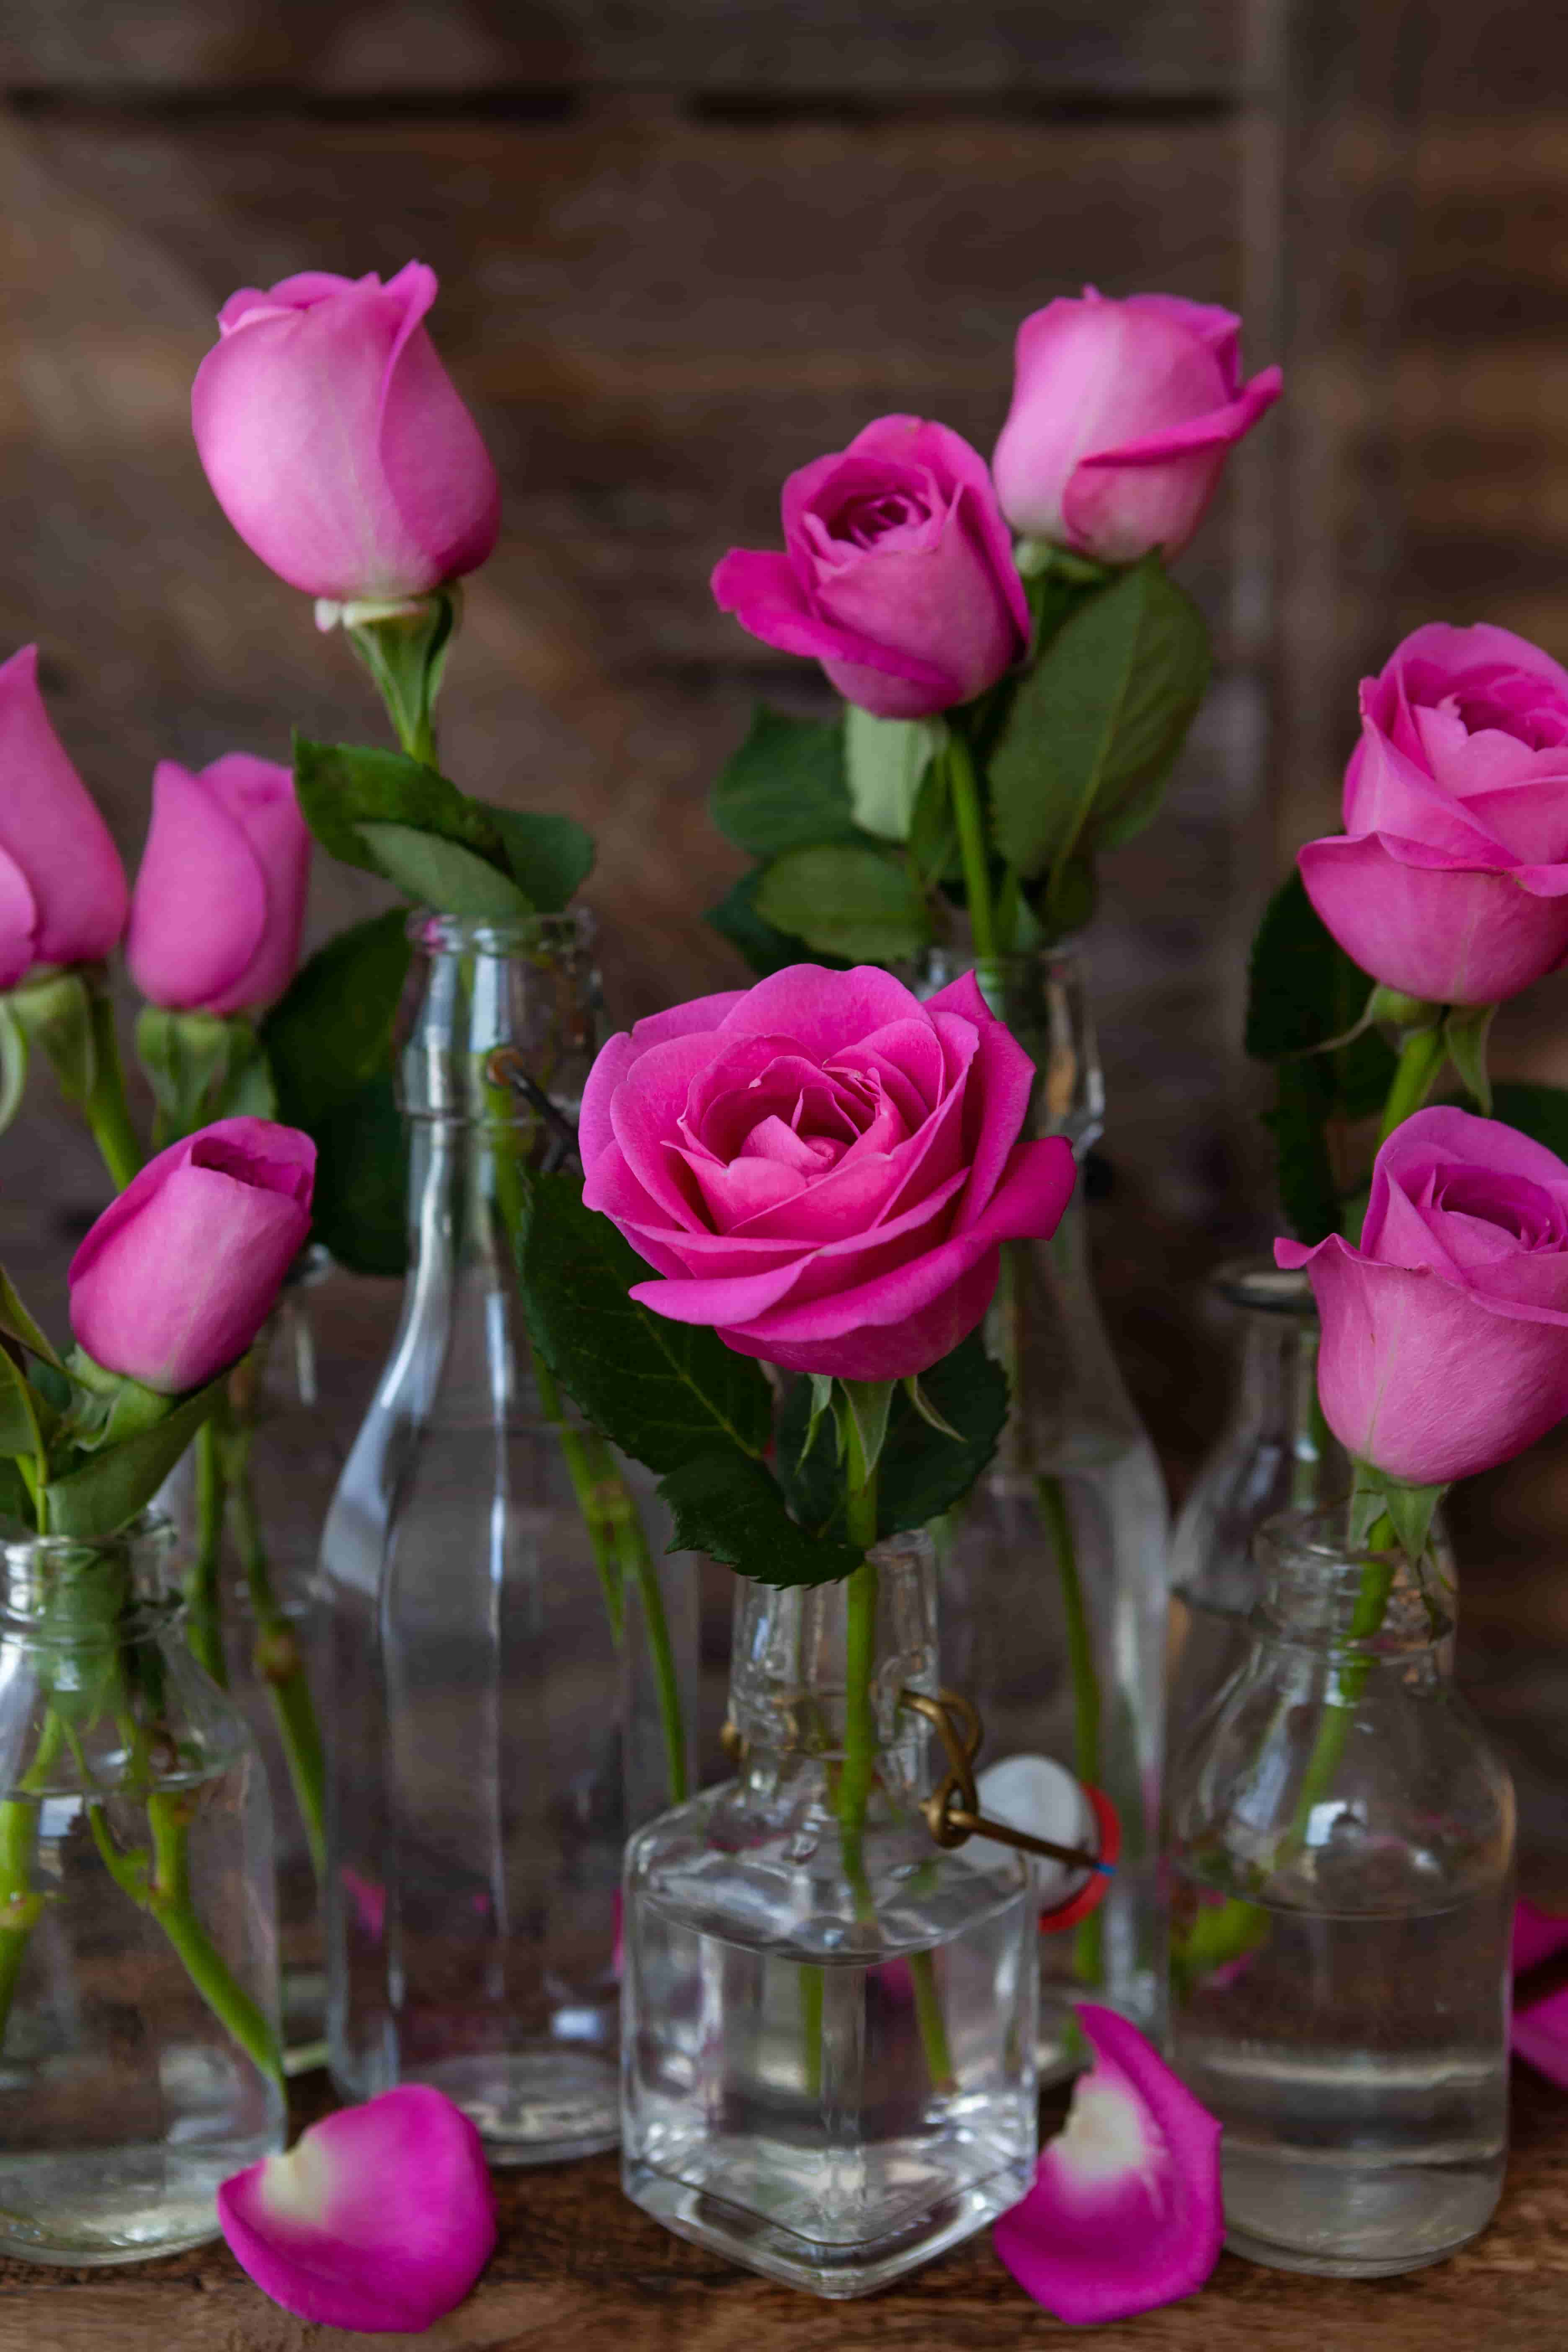 Lush of pink rose images in hd